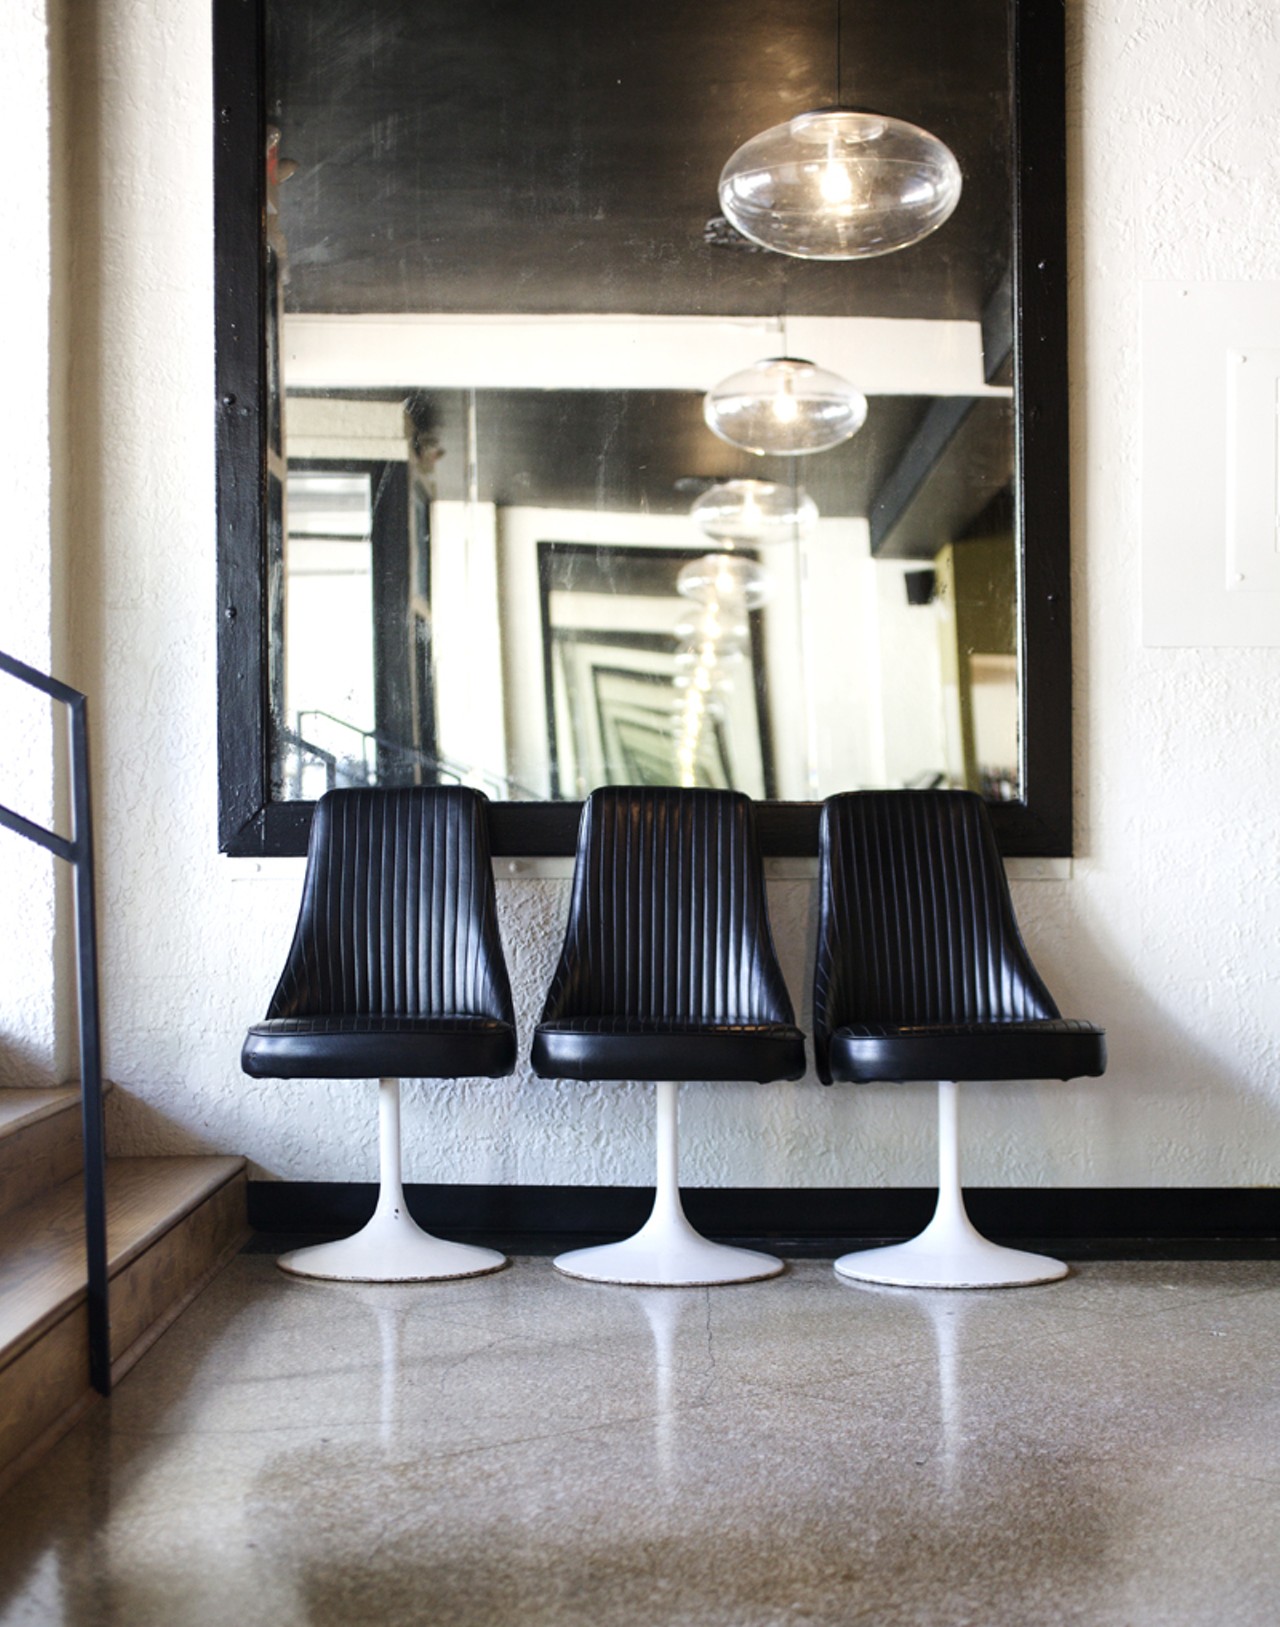 The simple decor at Water Street combines modern simplicity with a Mid-Century Modern aesthetic.